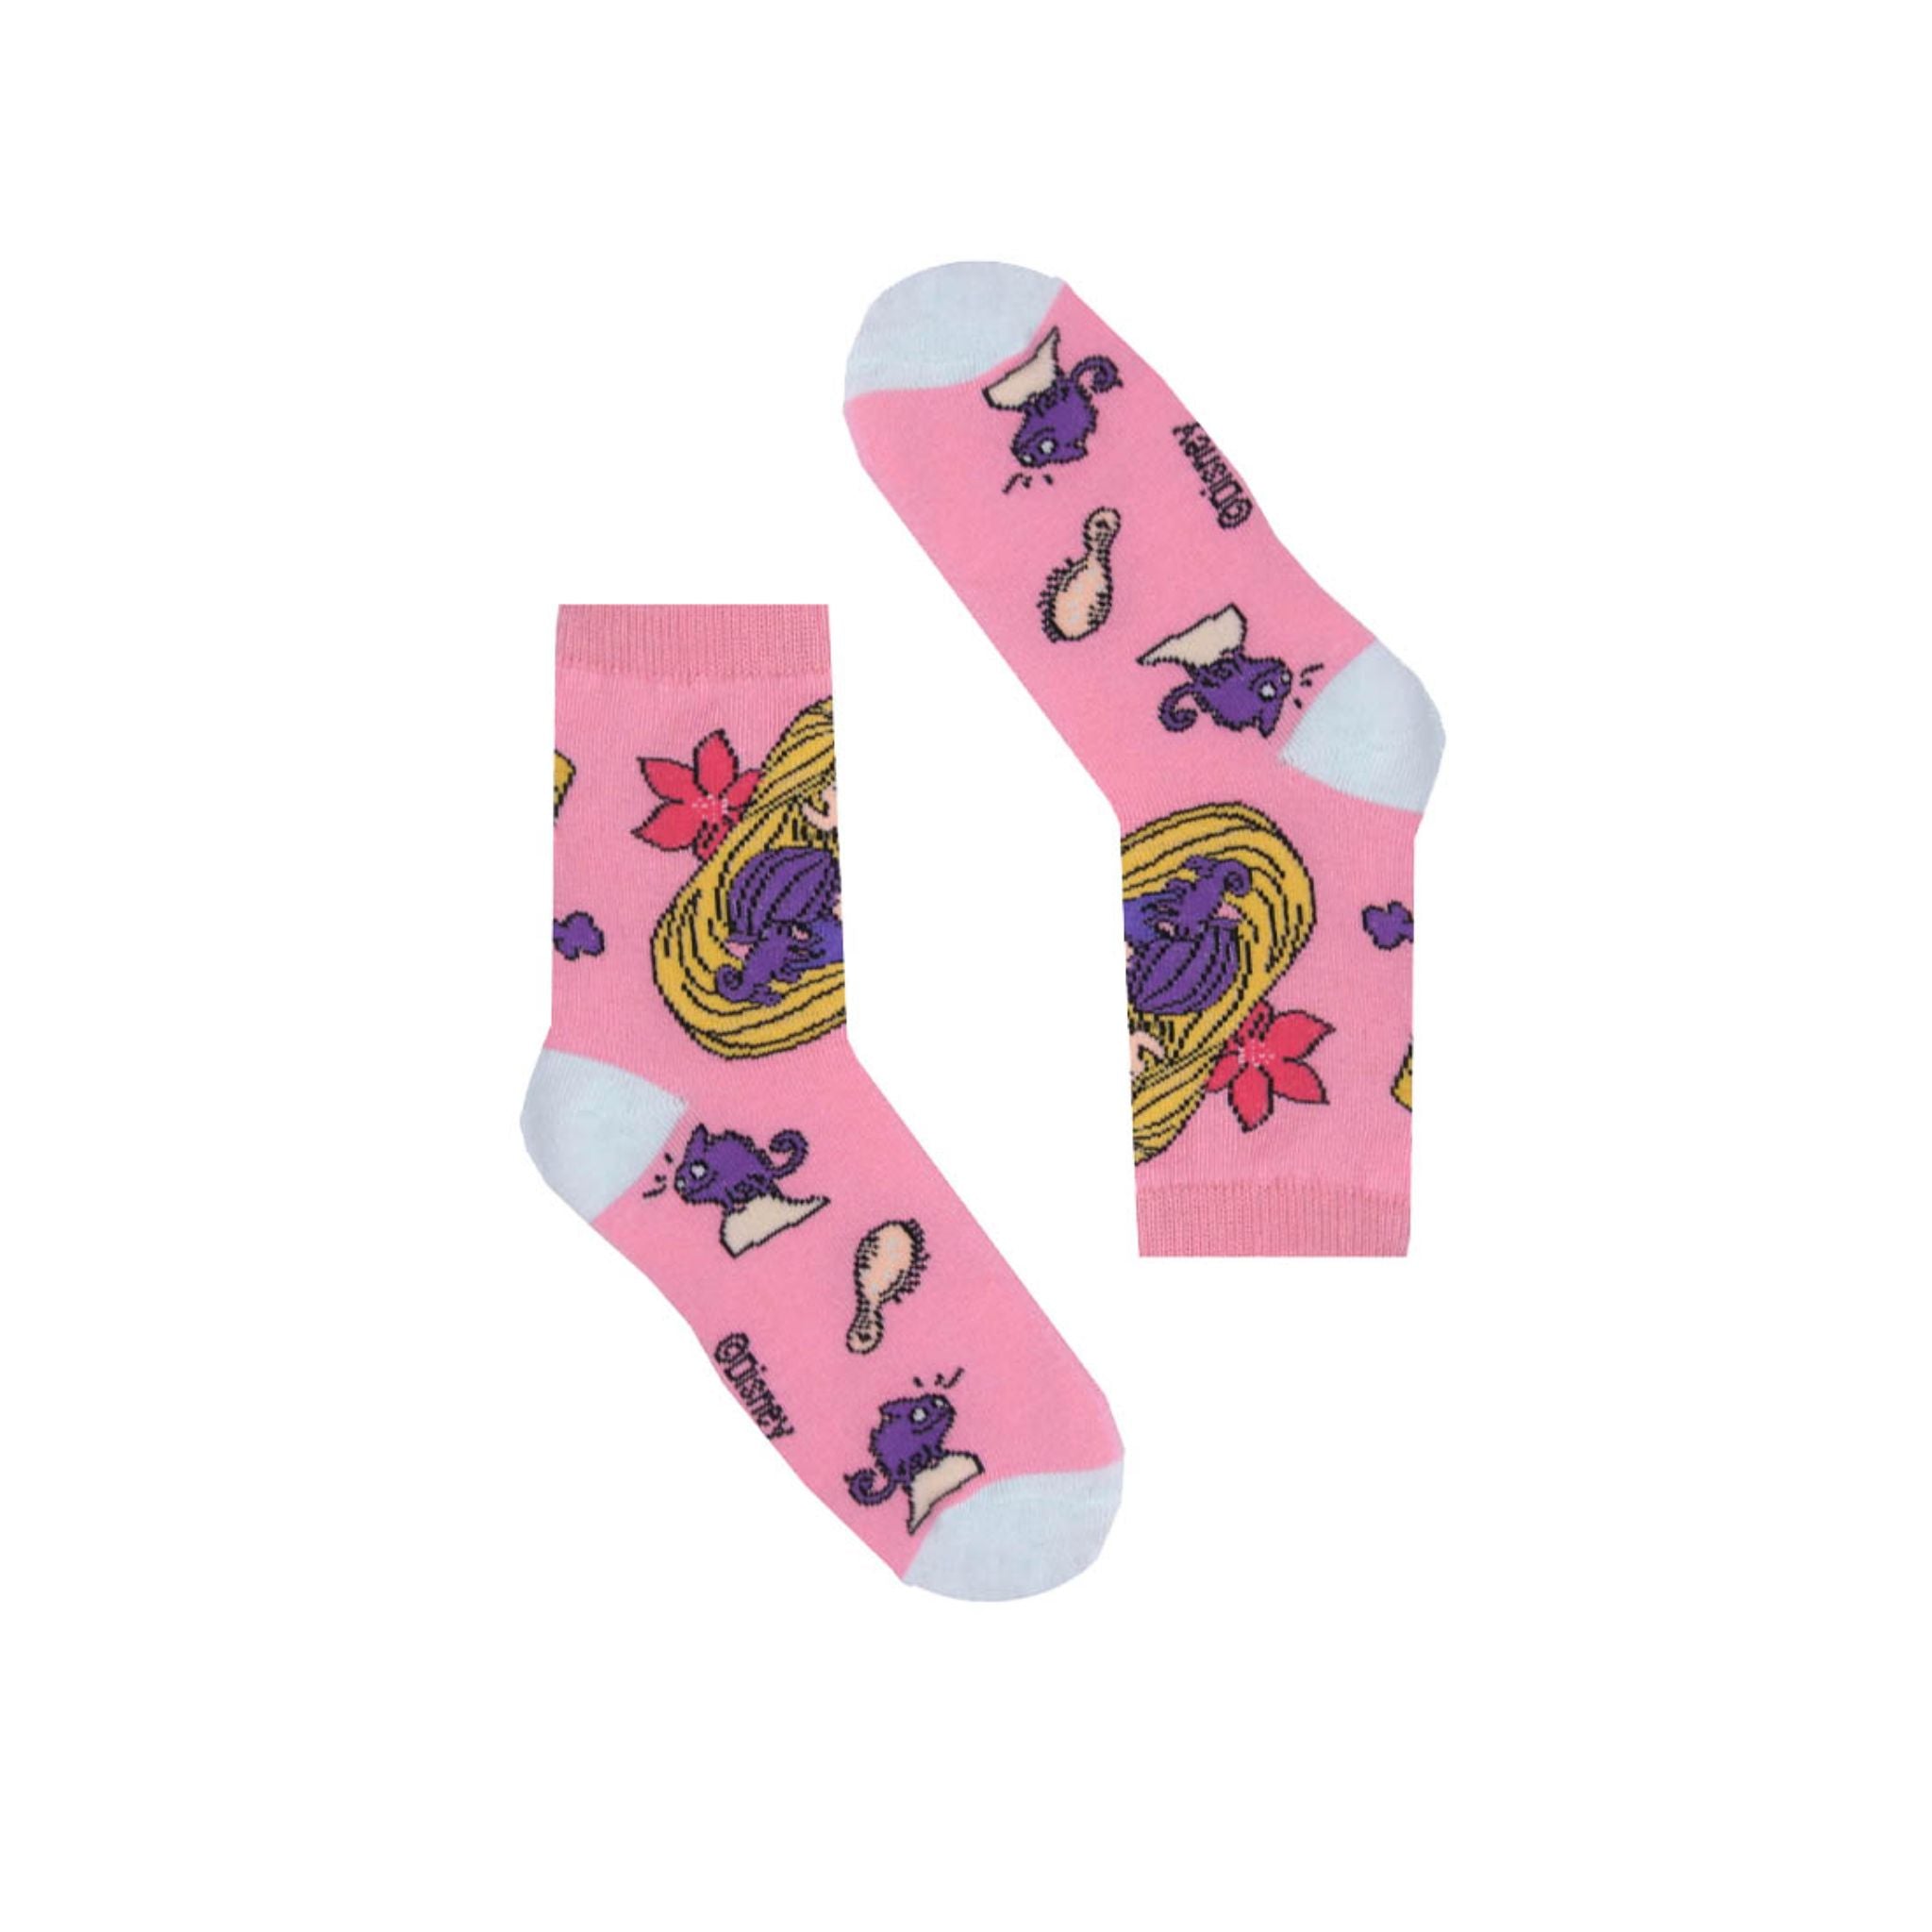 RAD RUSSEL Tangled Kids Socks - Ages 2 to 7 - Pink